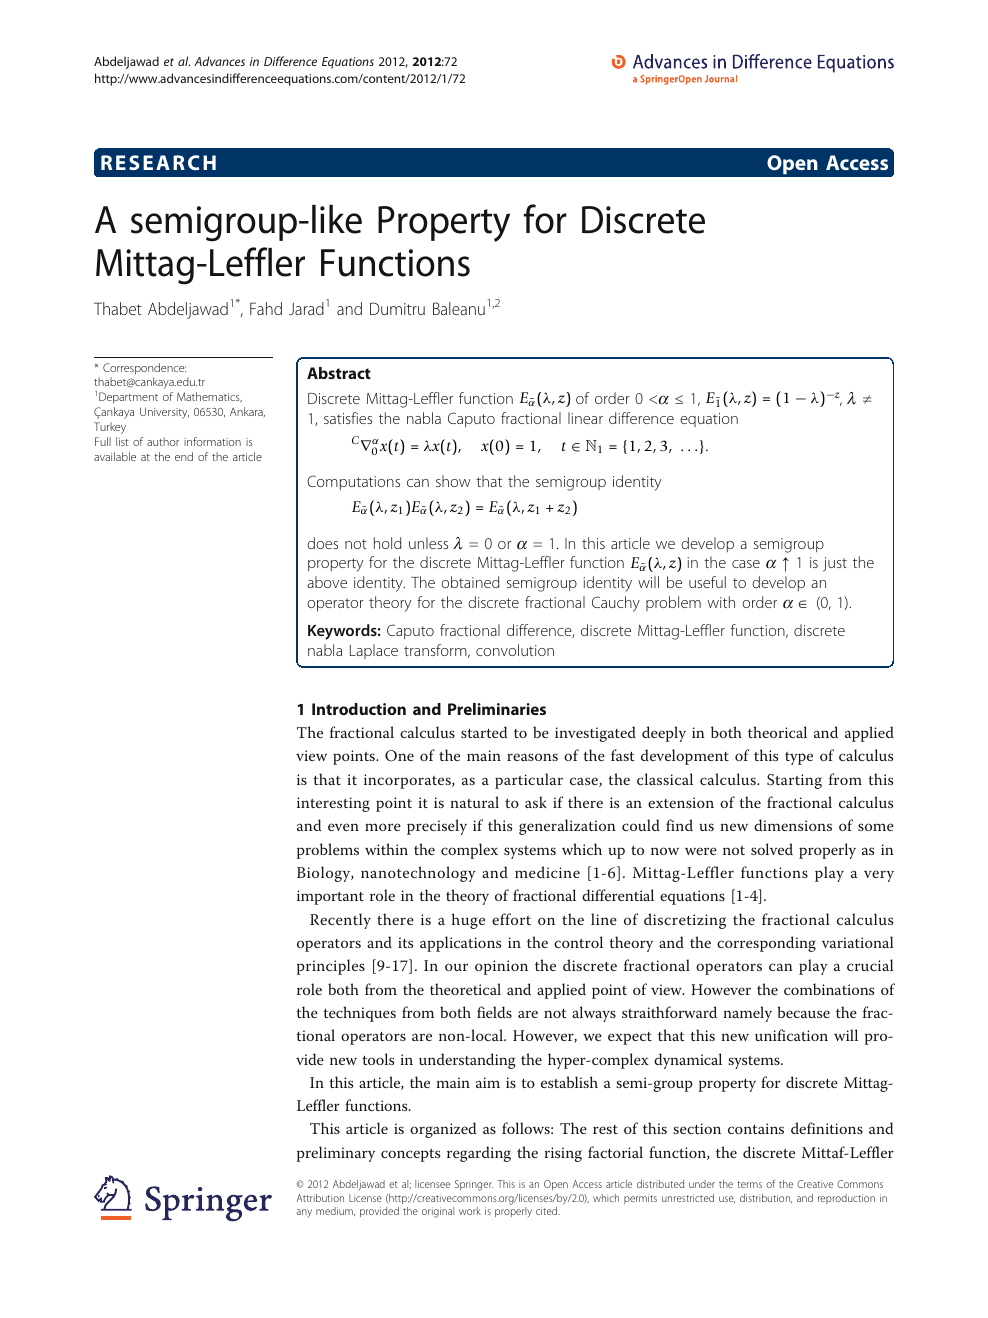 A Semigroup Like Property For Discrete Mittag Leffler Functions Topic Of Research Paper In Mathematics Download Scholarly Article Pdf And Read For Free On Cyberleninka Open Science Hub